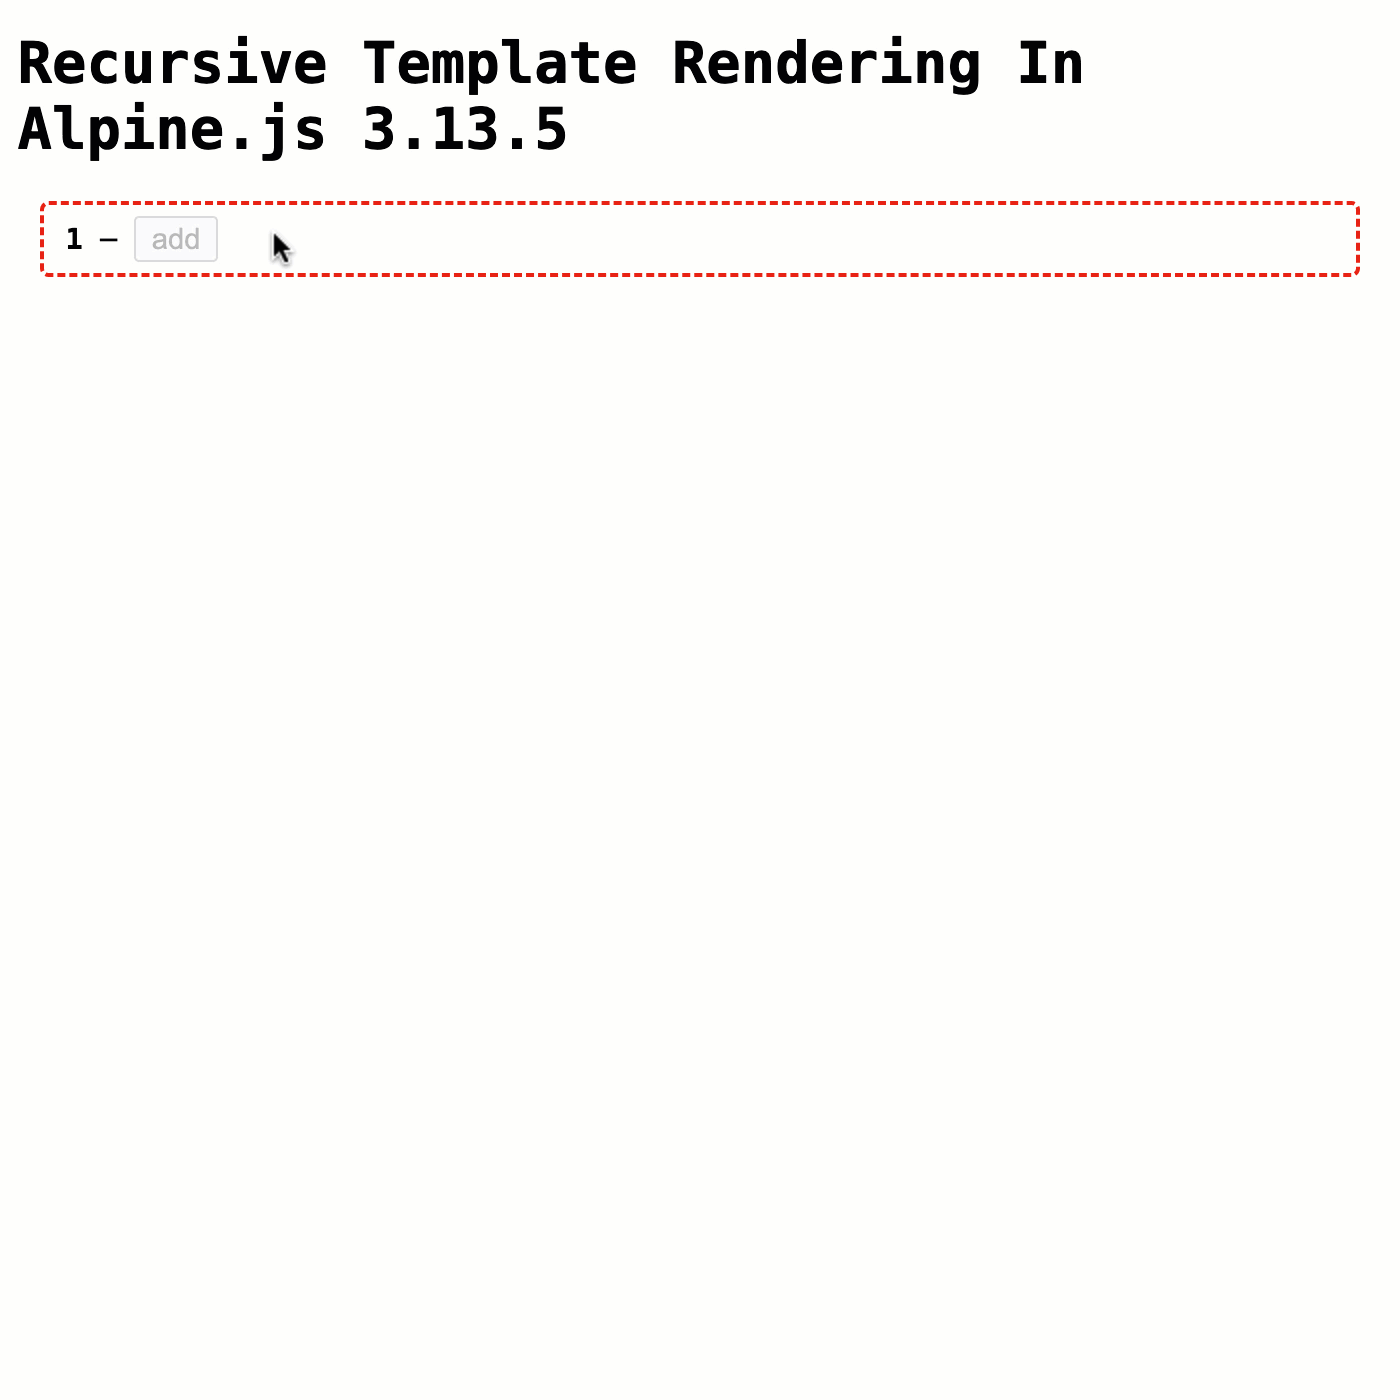 A tree data structure being edited and rendered using recursive templates in Alpine.js 3.13.5.